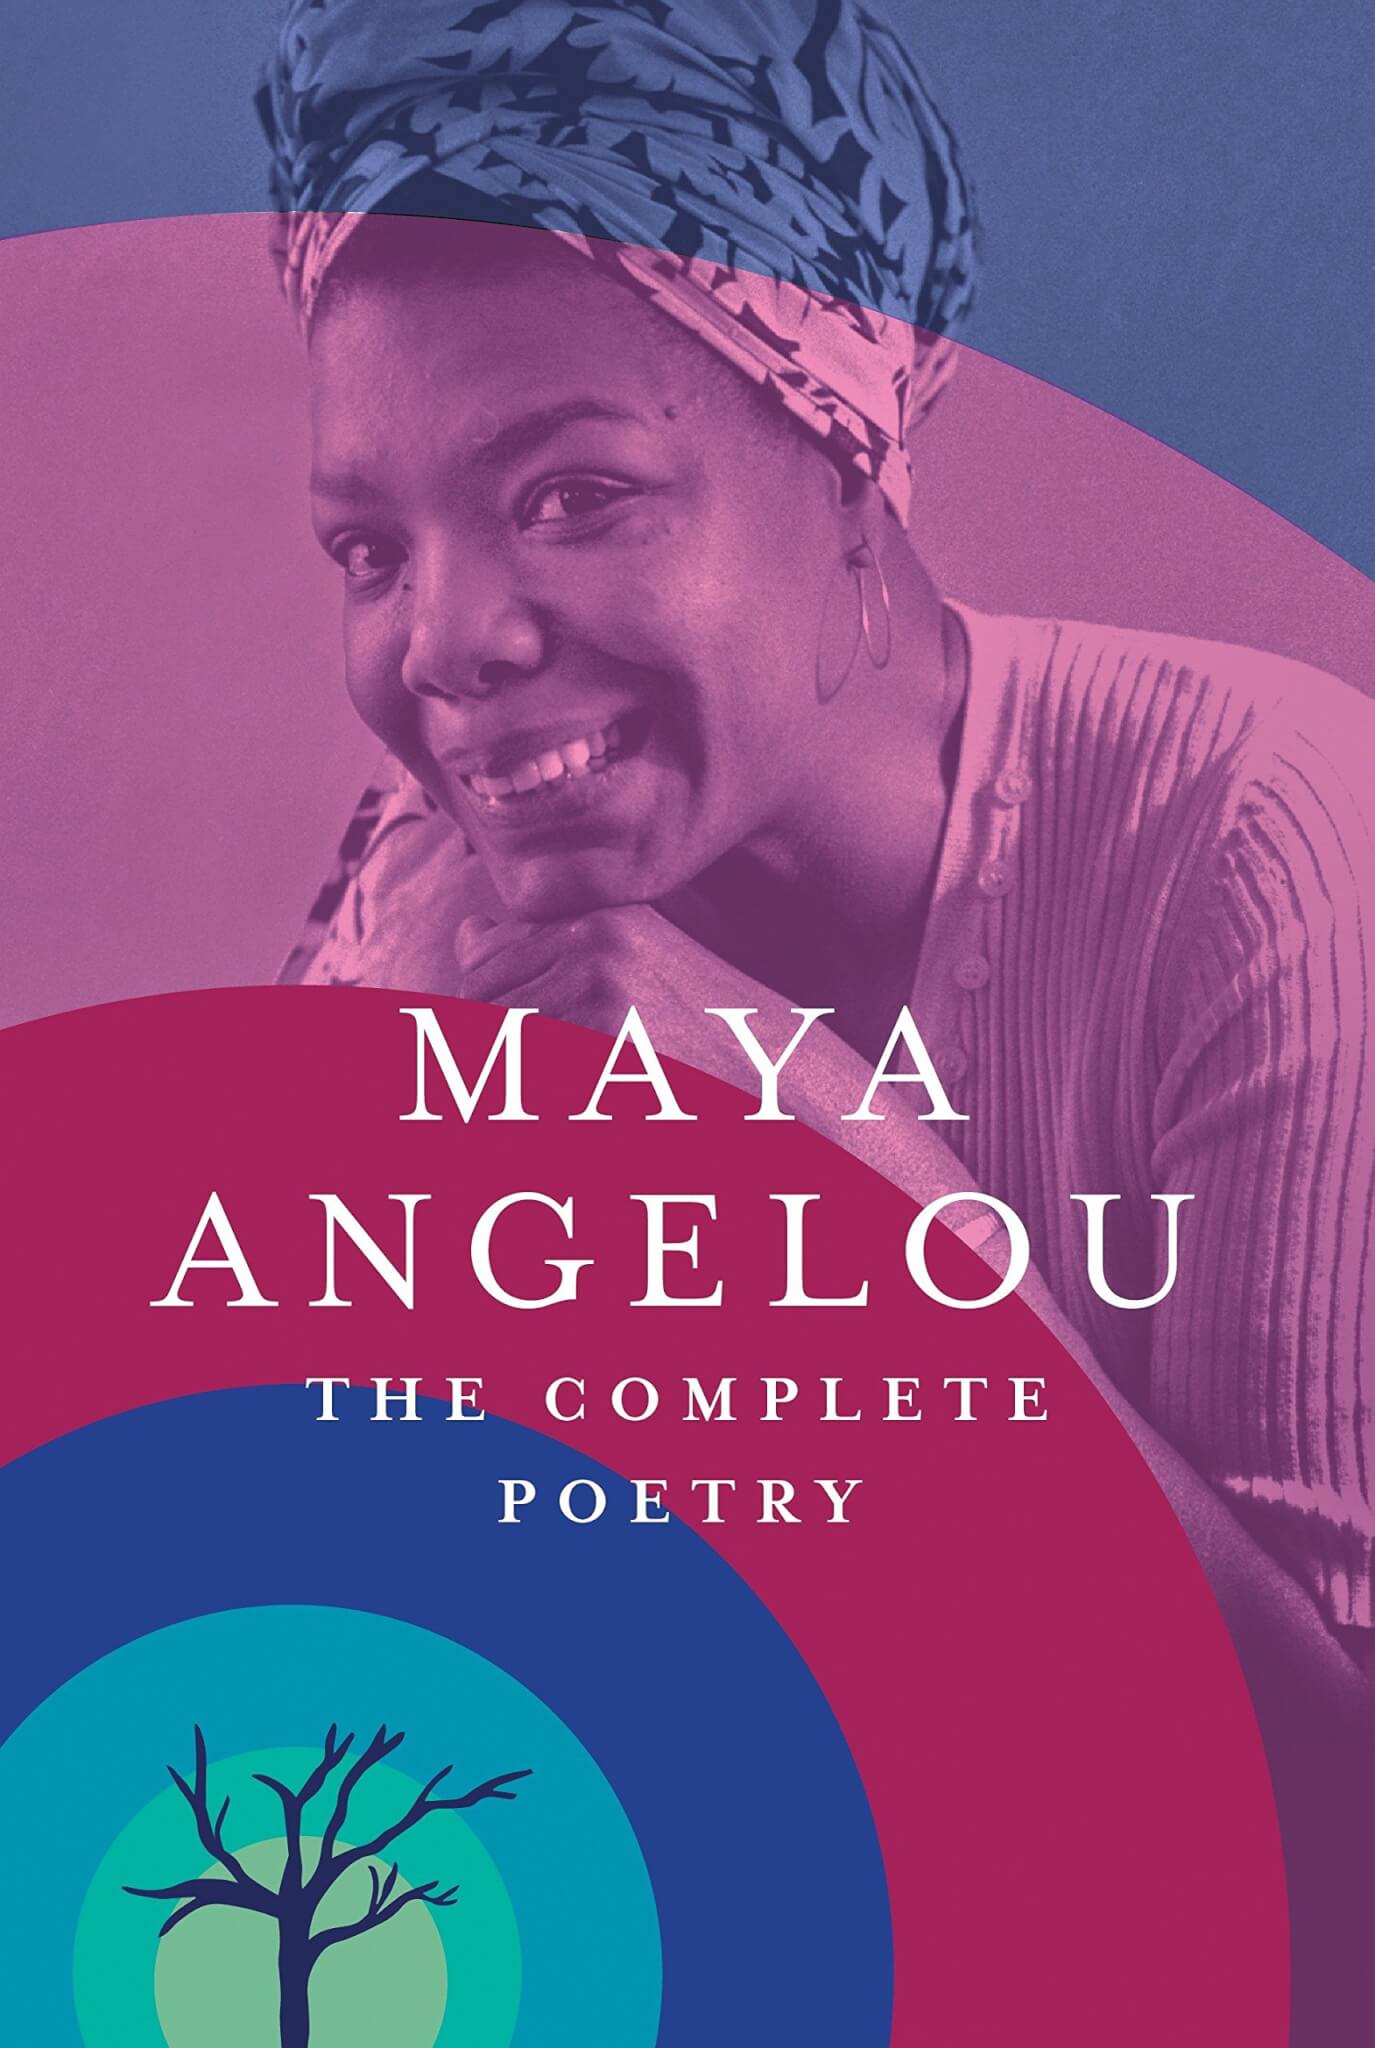 "Maya Angelou: The Complete Poetry"